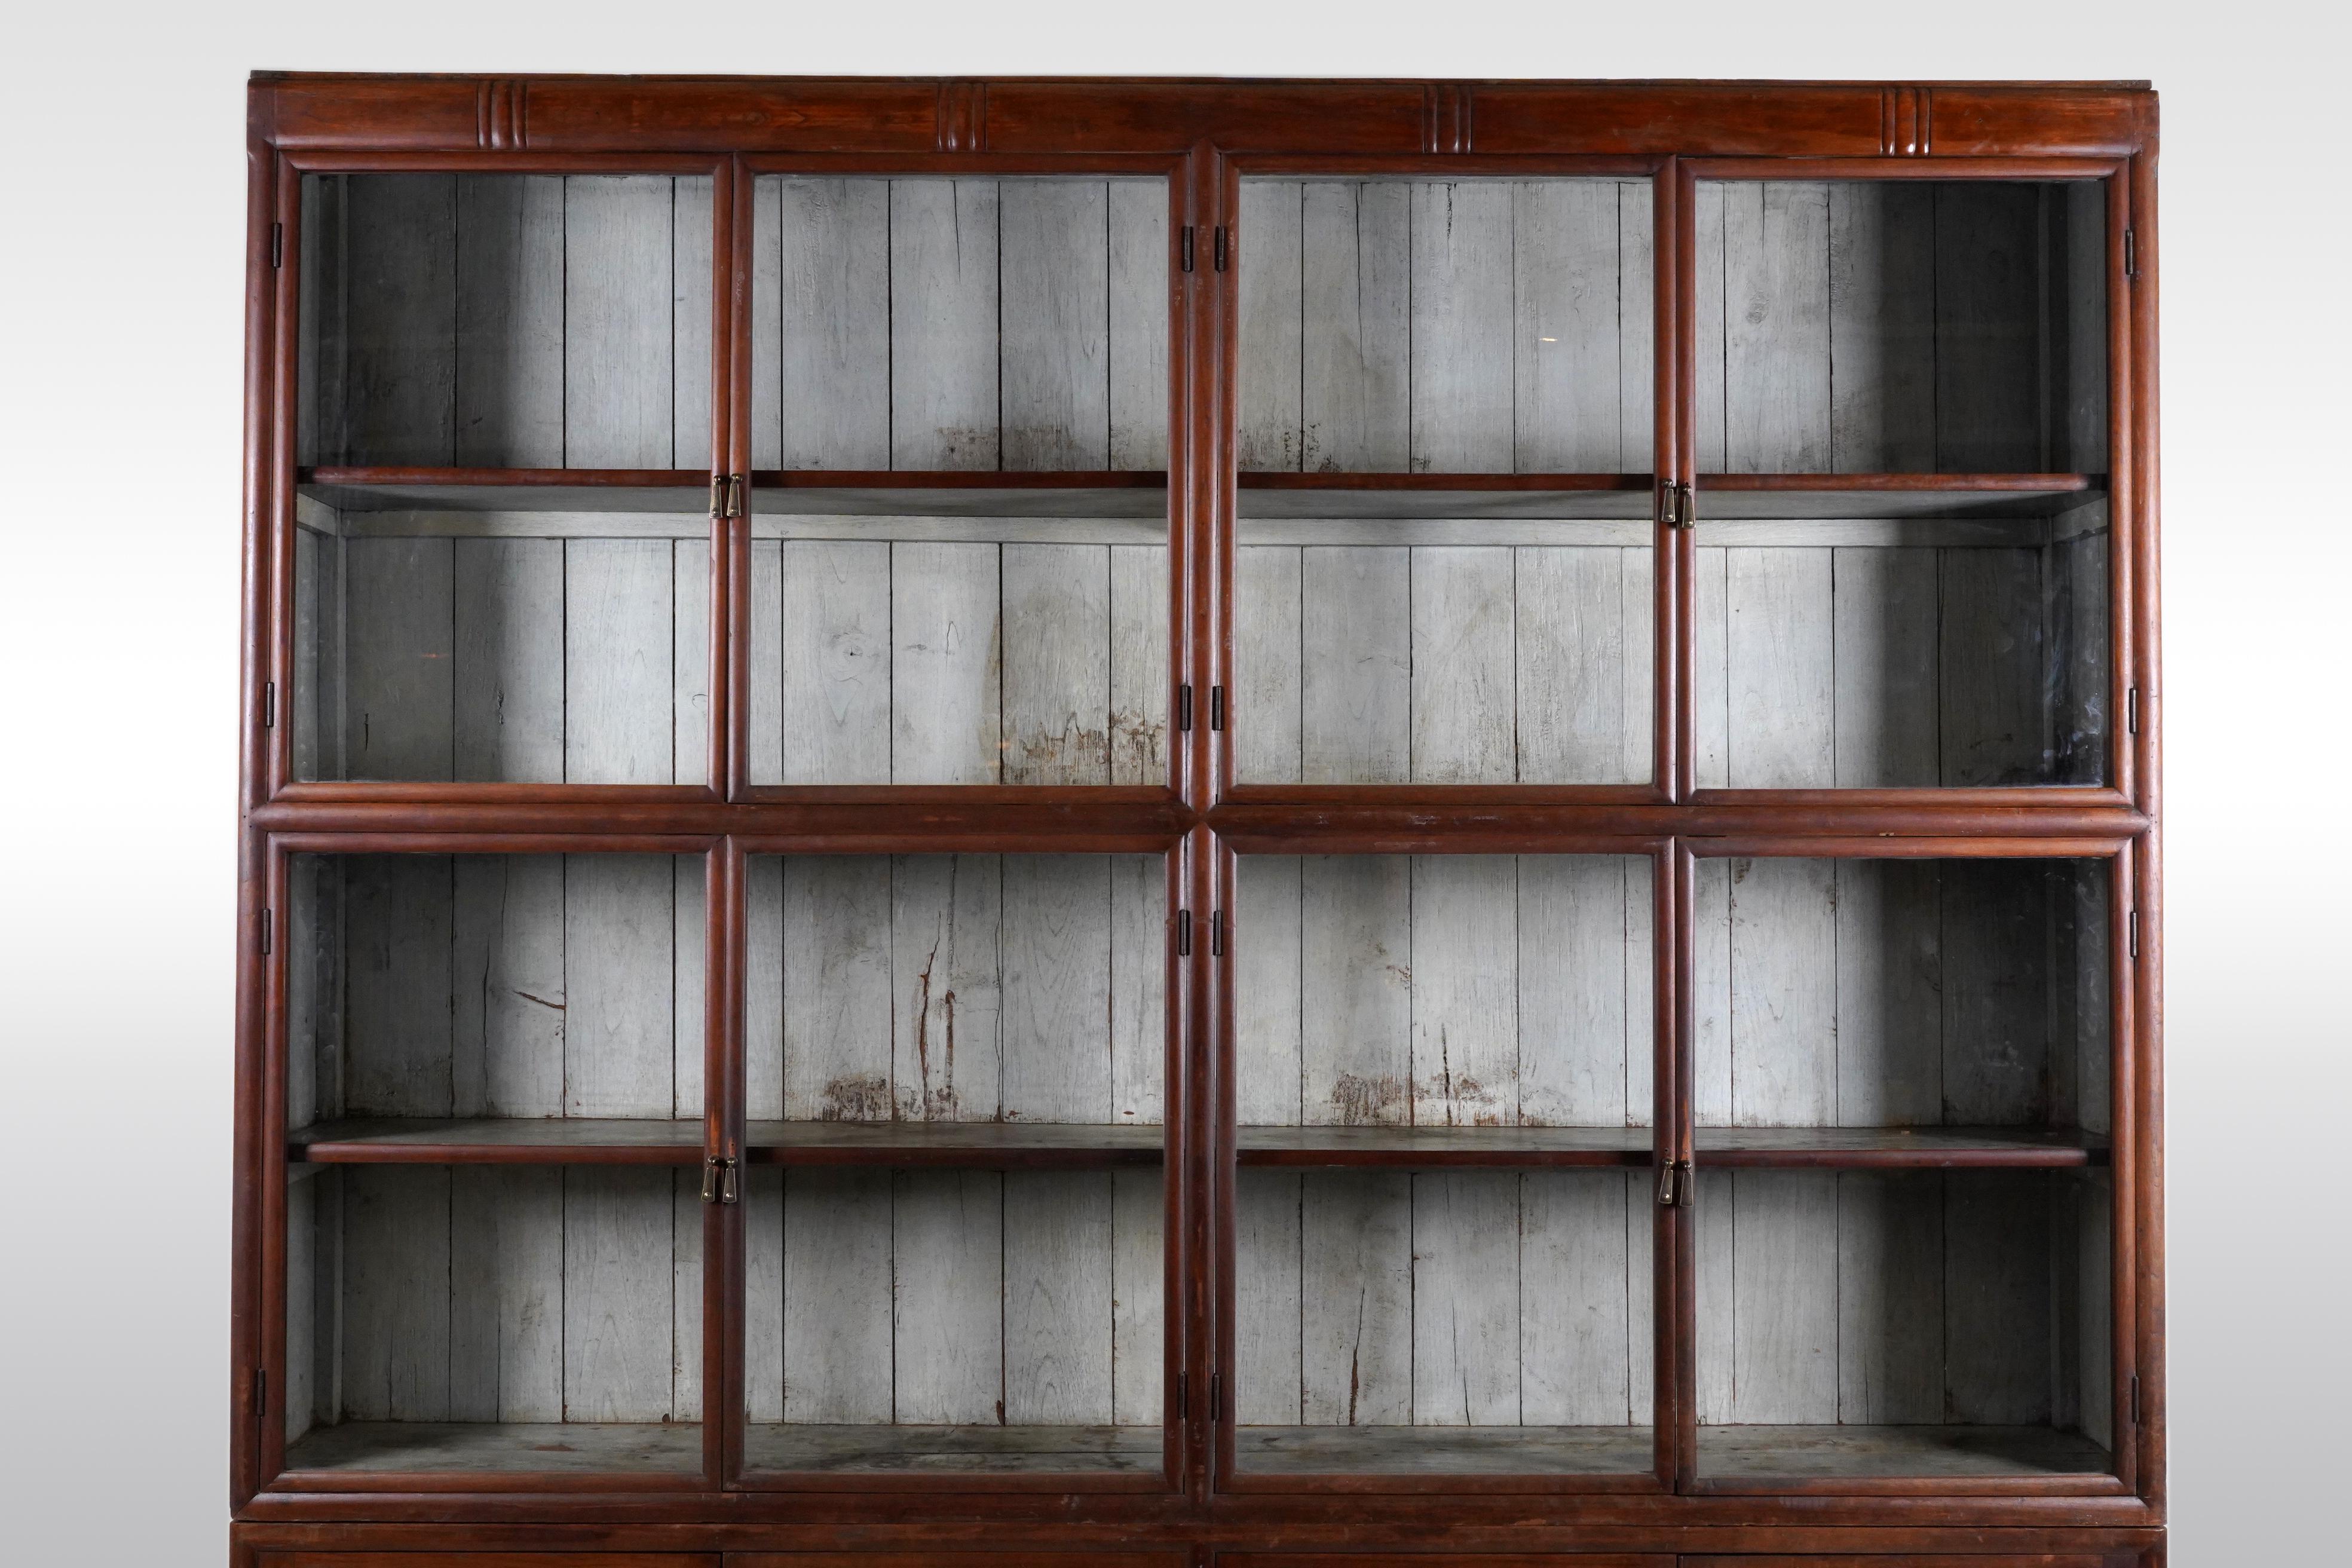 A British Colonial Art Deco Teak Bookcase with Lower Storage  For Sale 3